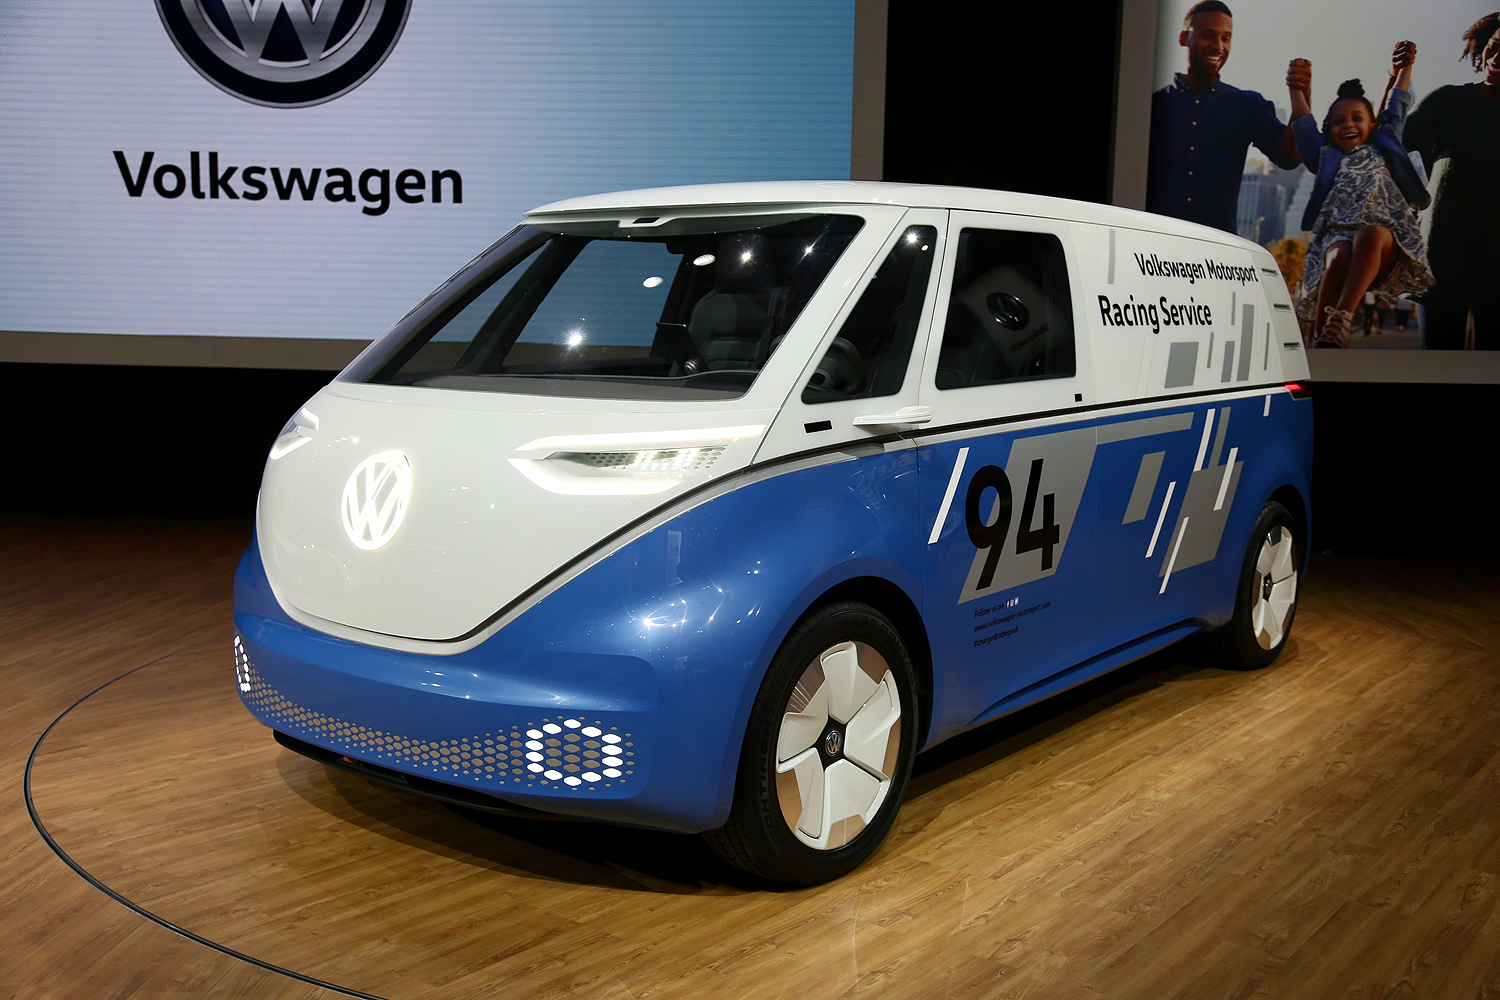 volkswagen id buzz cargo will report for delivery duty in 2022 mb vw carg race 2